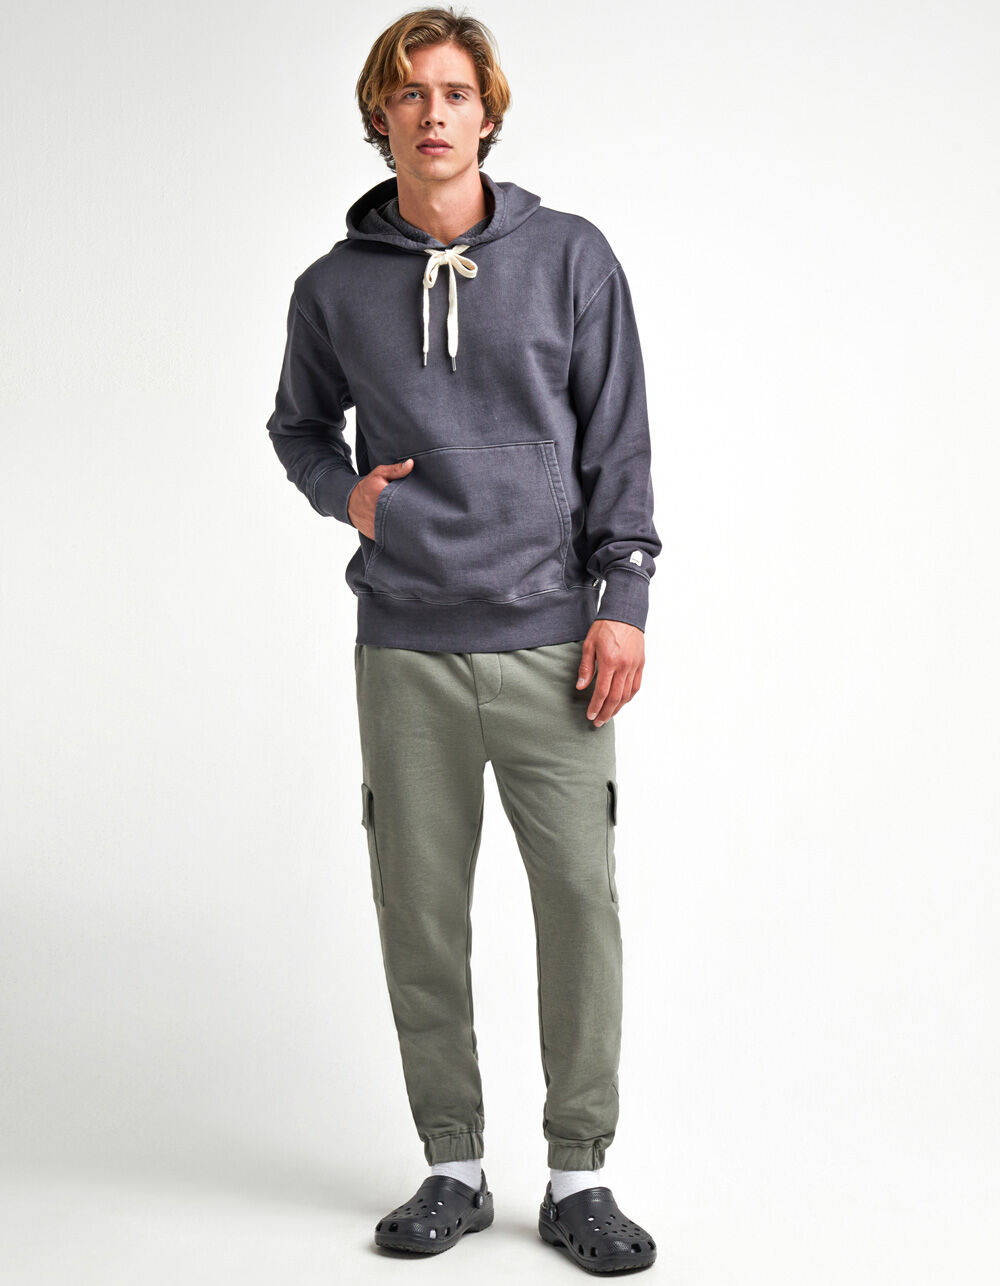 RSQ Mens Agave Fleece Cargo Jogger Sweatpants - AGAVE | Tillys